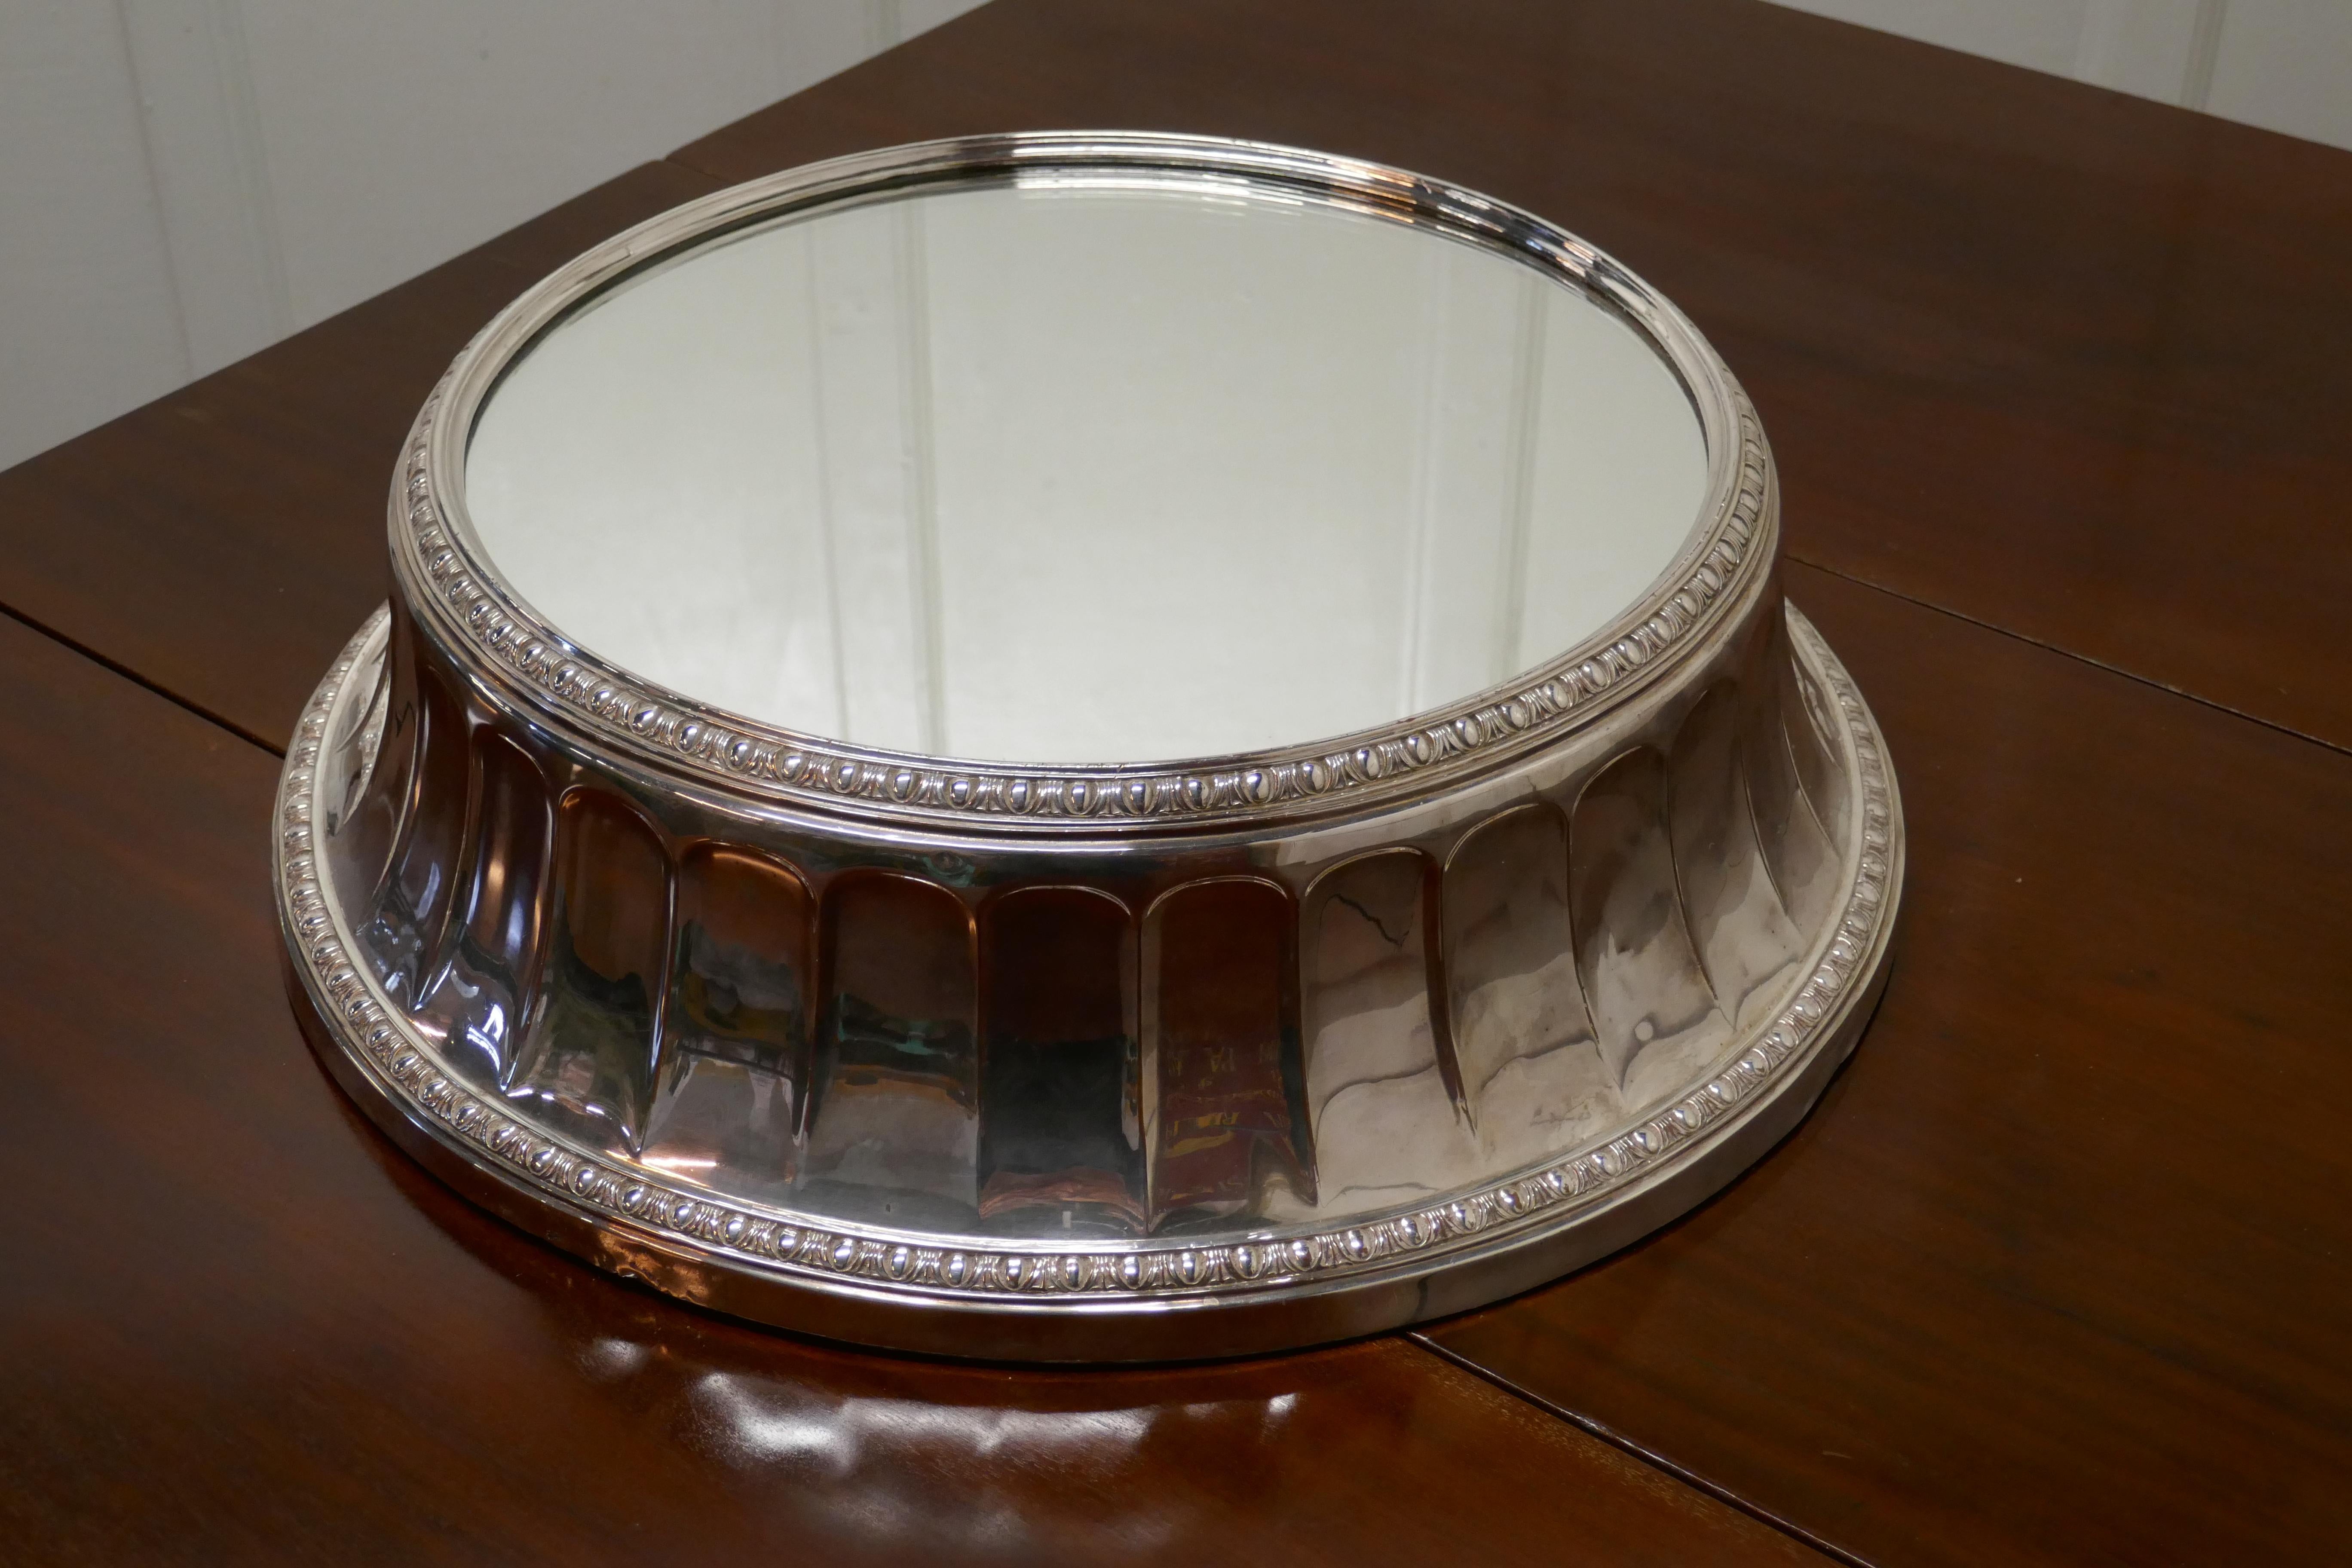 Large vintage mirror top Elkington silver plate wedding cake stand

This beautiful piece from Elkington & Co, a sure sign of top quality, the stand is 6” high with mirror top plate
The stand has a wide fluted side, and will take a cake up to 14”